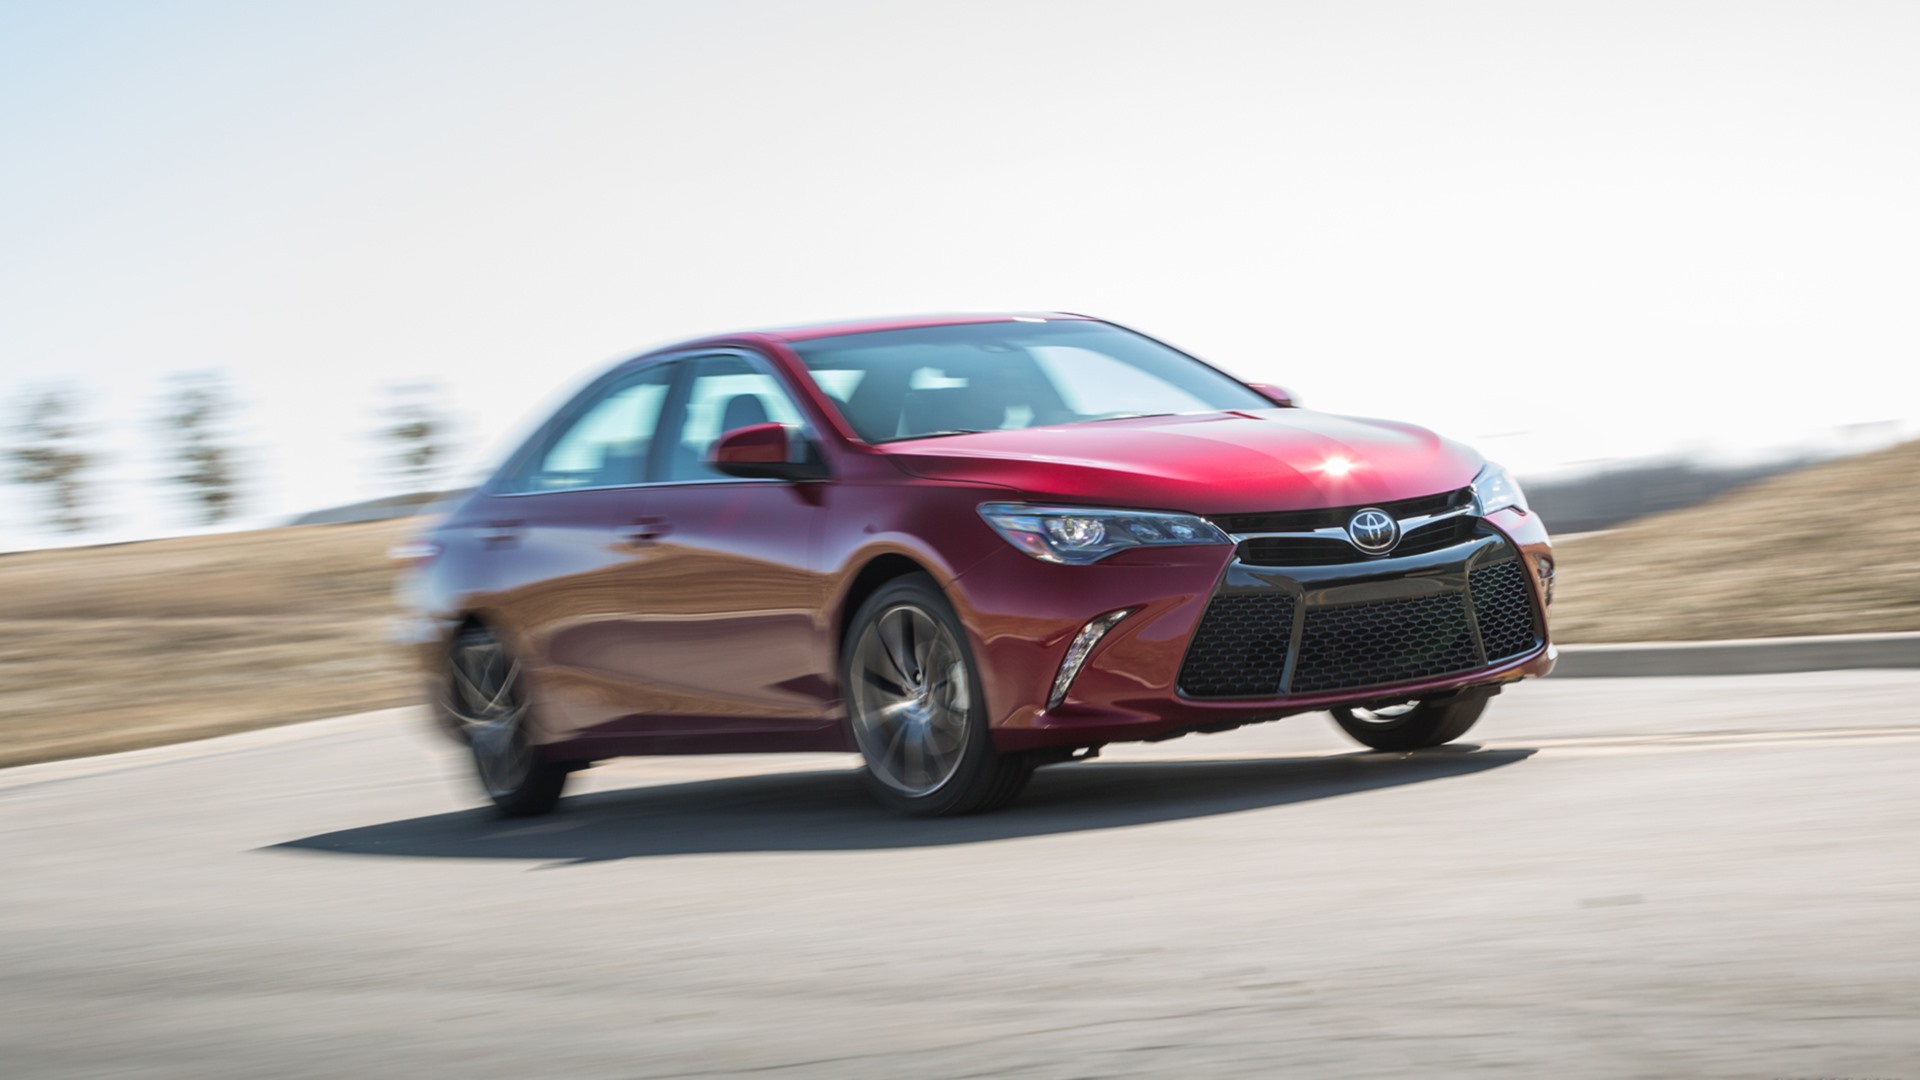 2015 Toyota Camry Wallpapers